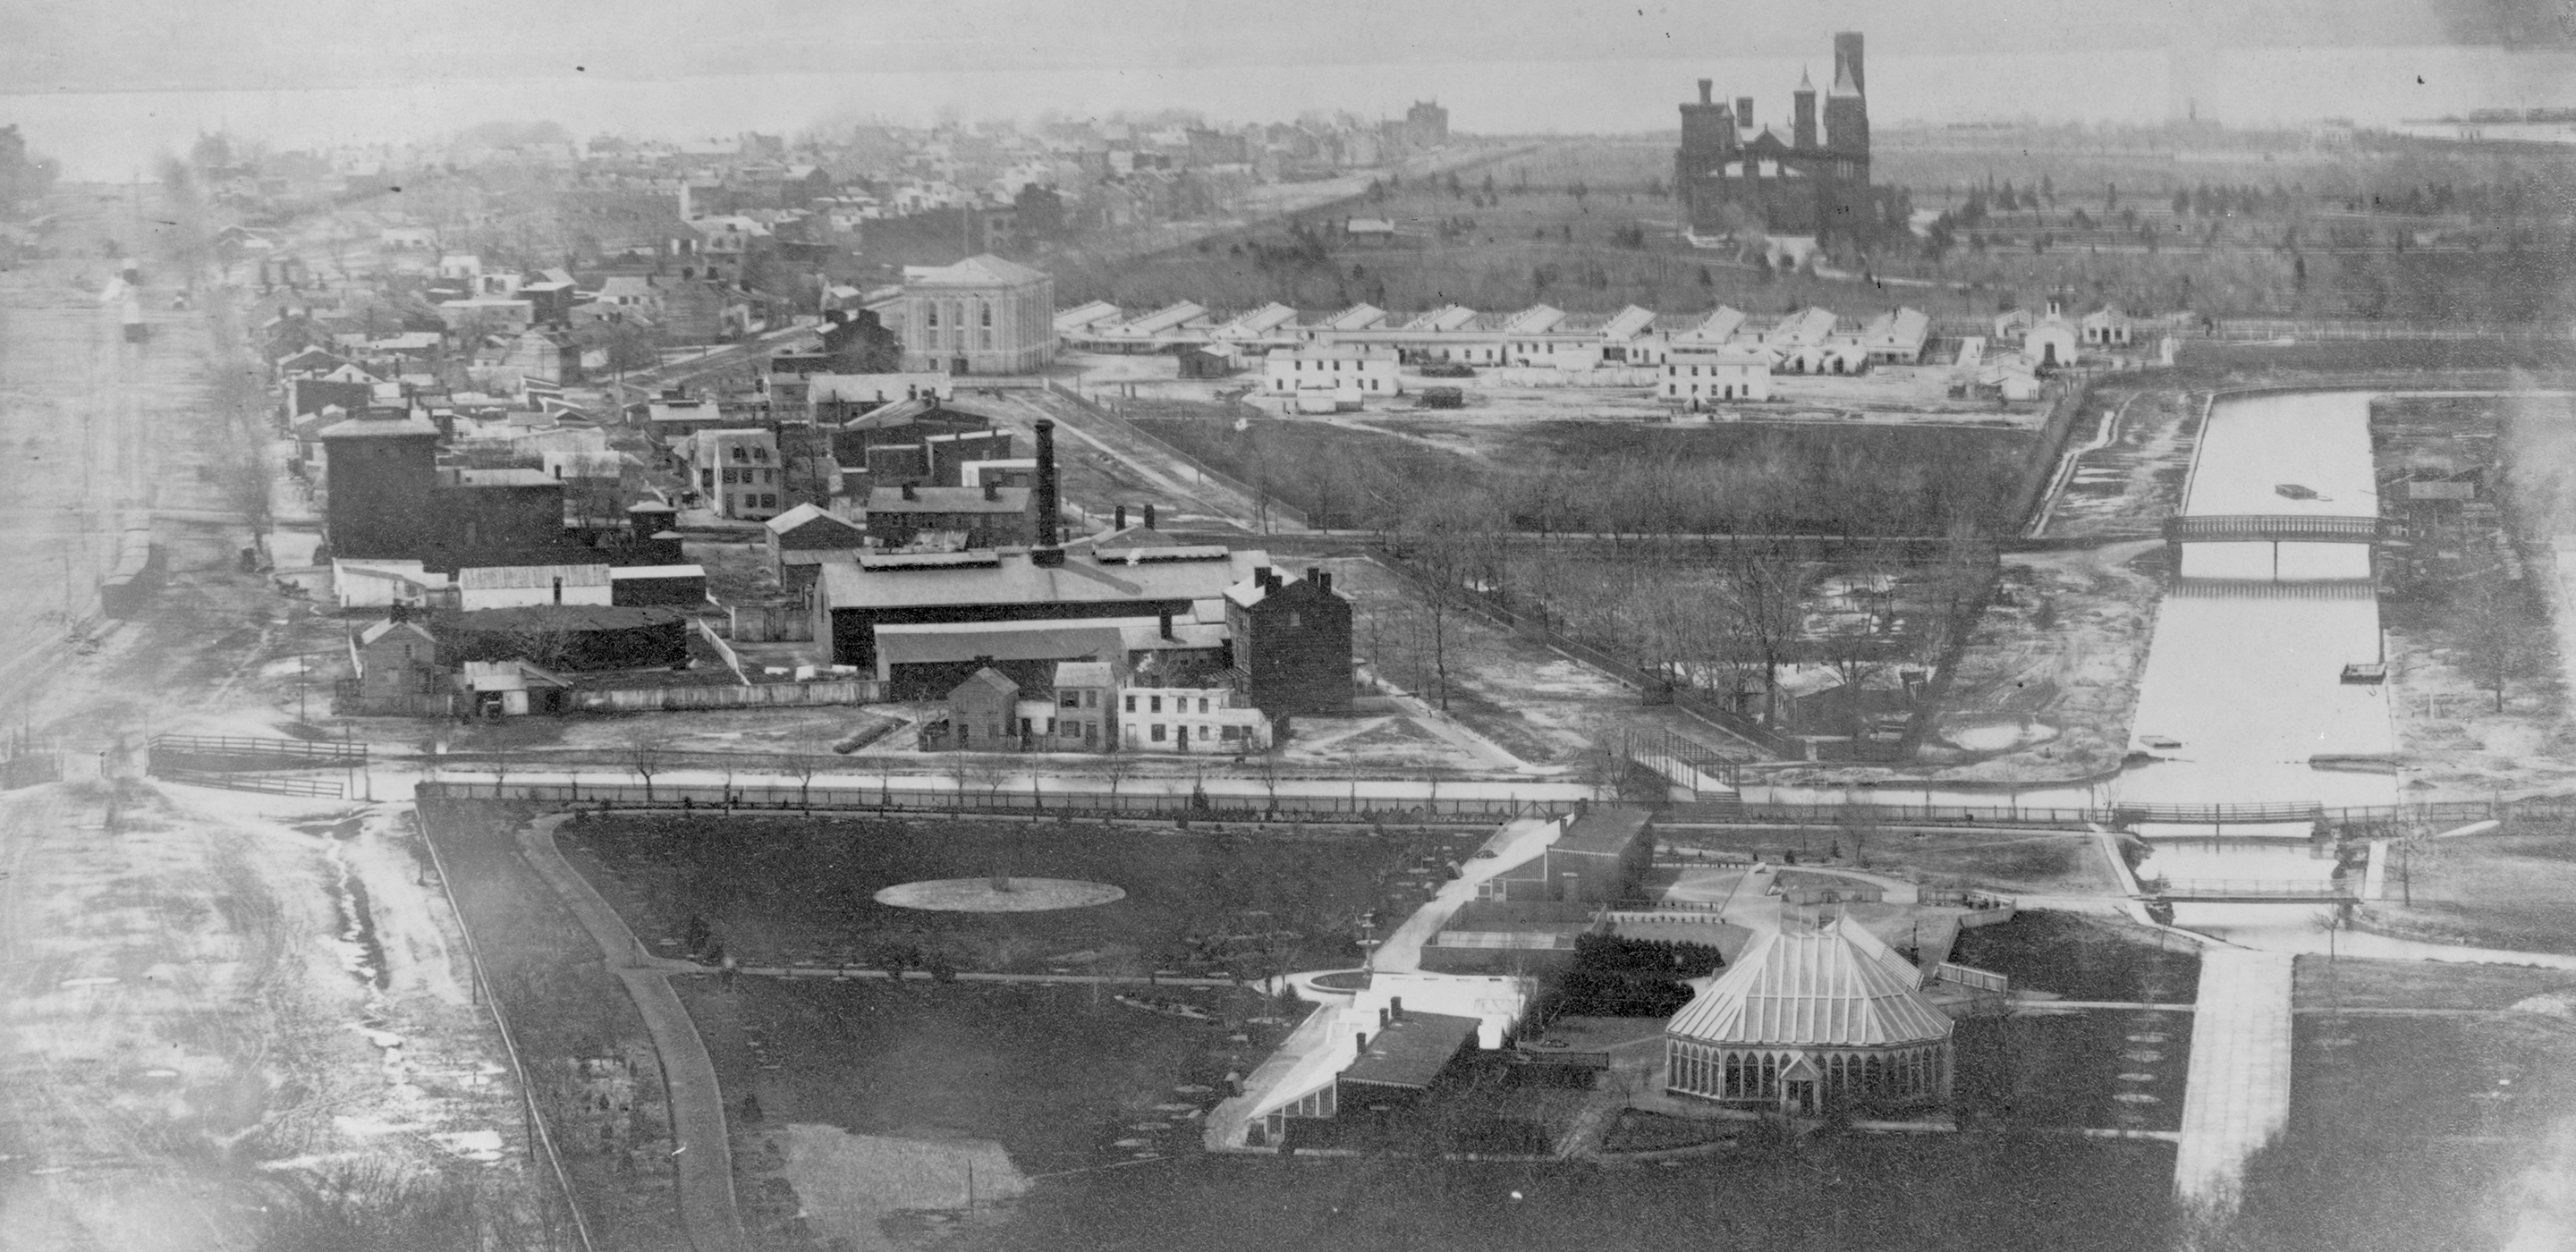 Black and white photograph overlooking the Washington City Canal; featuring muddy roads, a Civil War hospital, the Smithsonian Castle, and the Potomac River in the background.